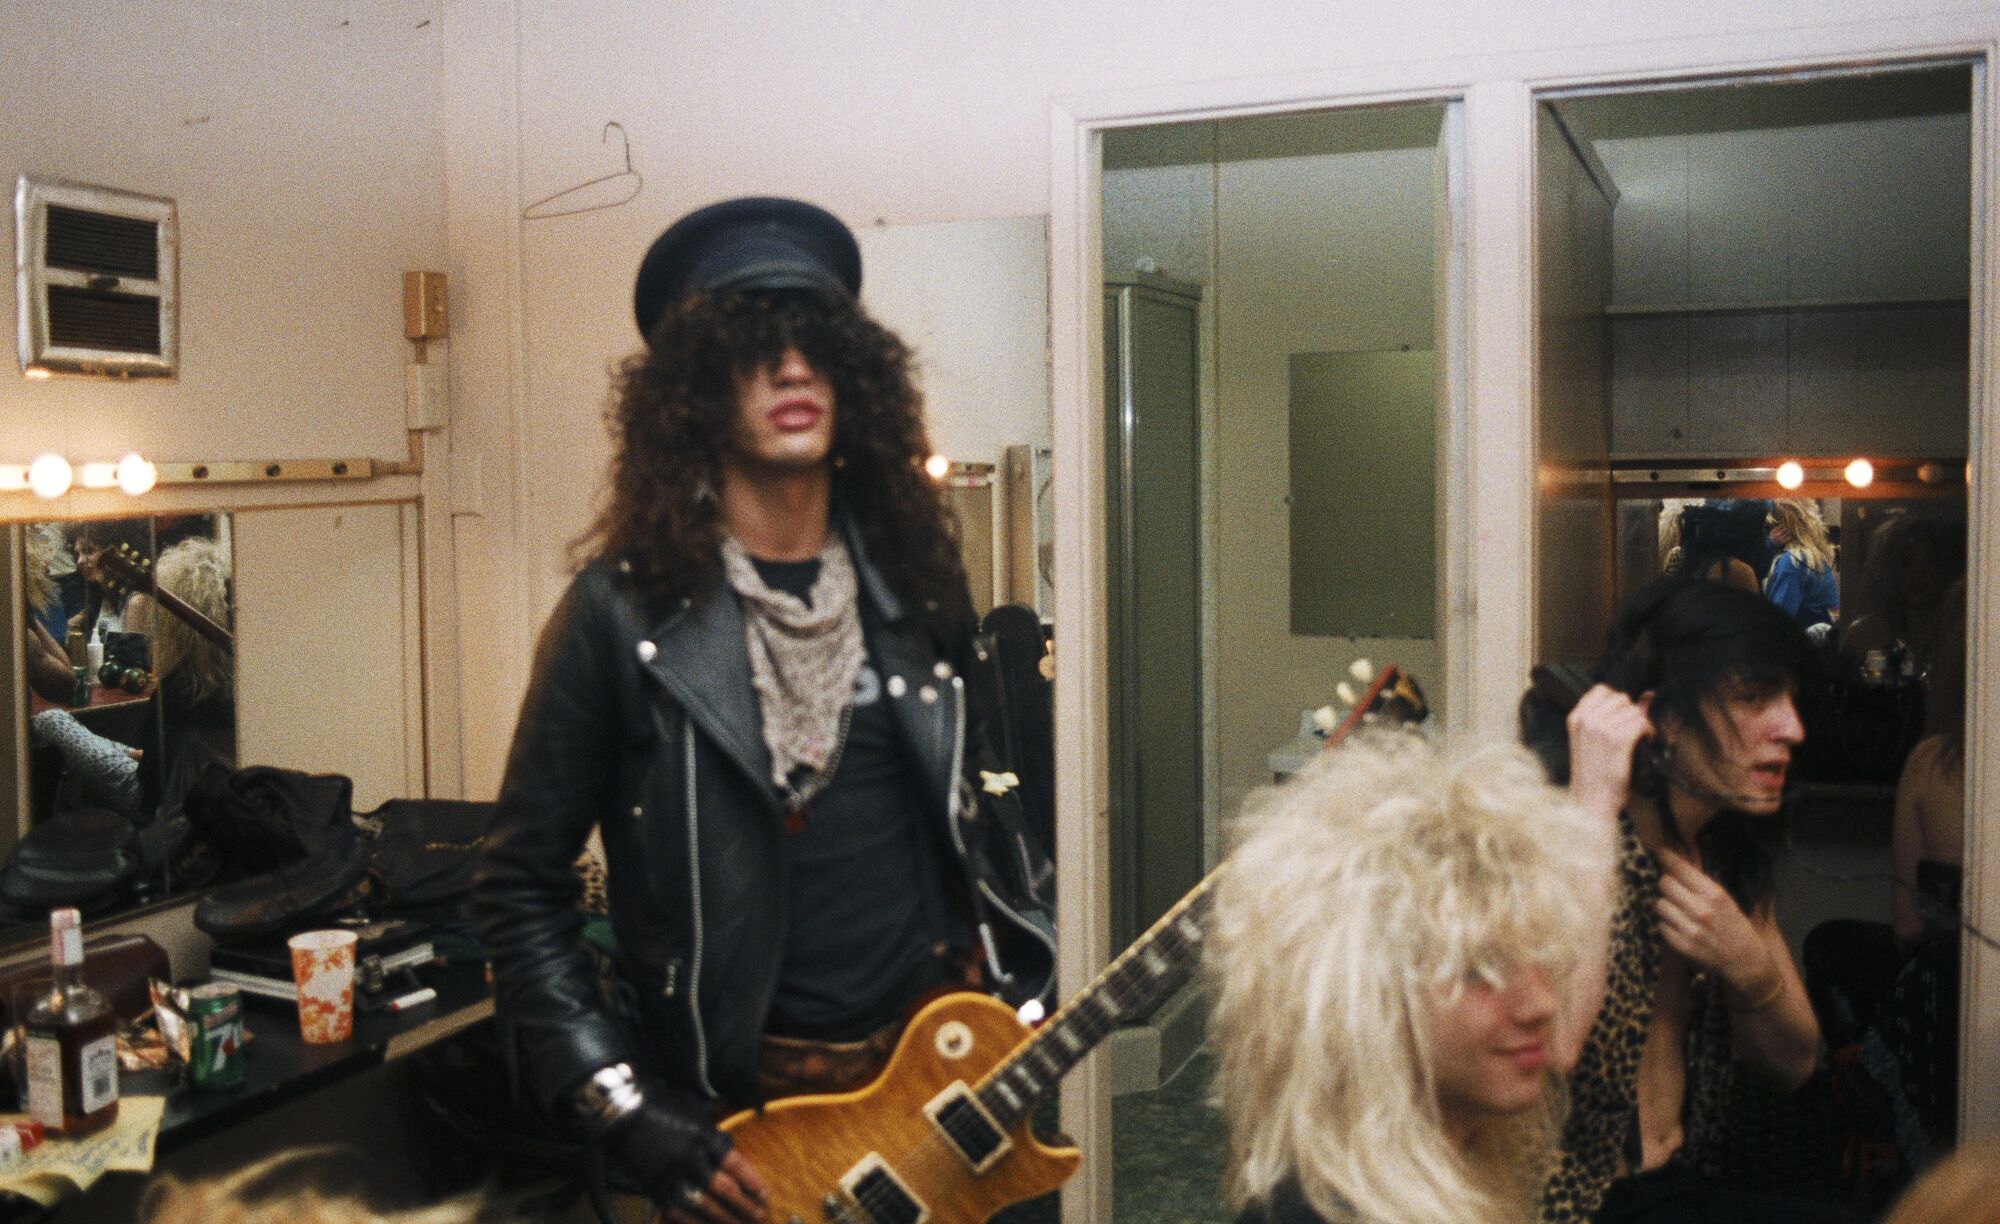 A hair-metal band backstage in the '80s.